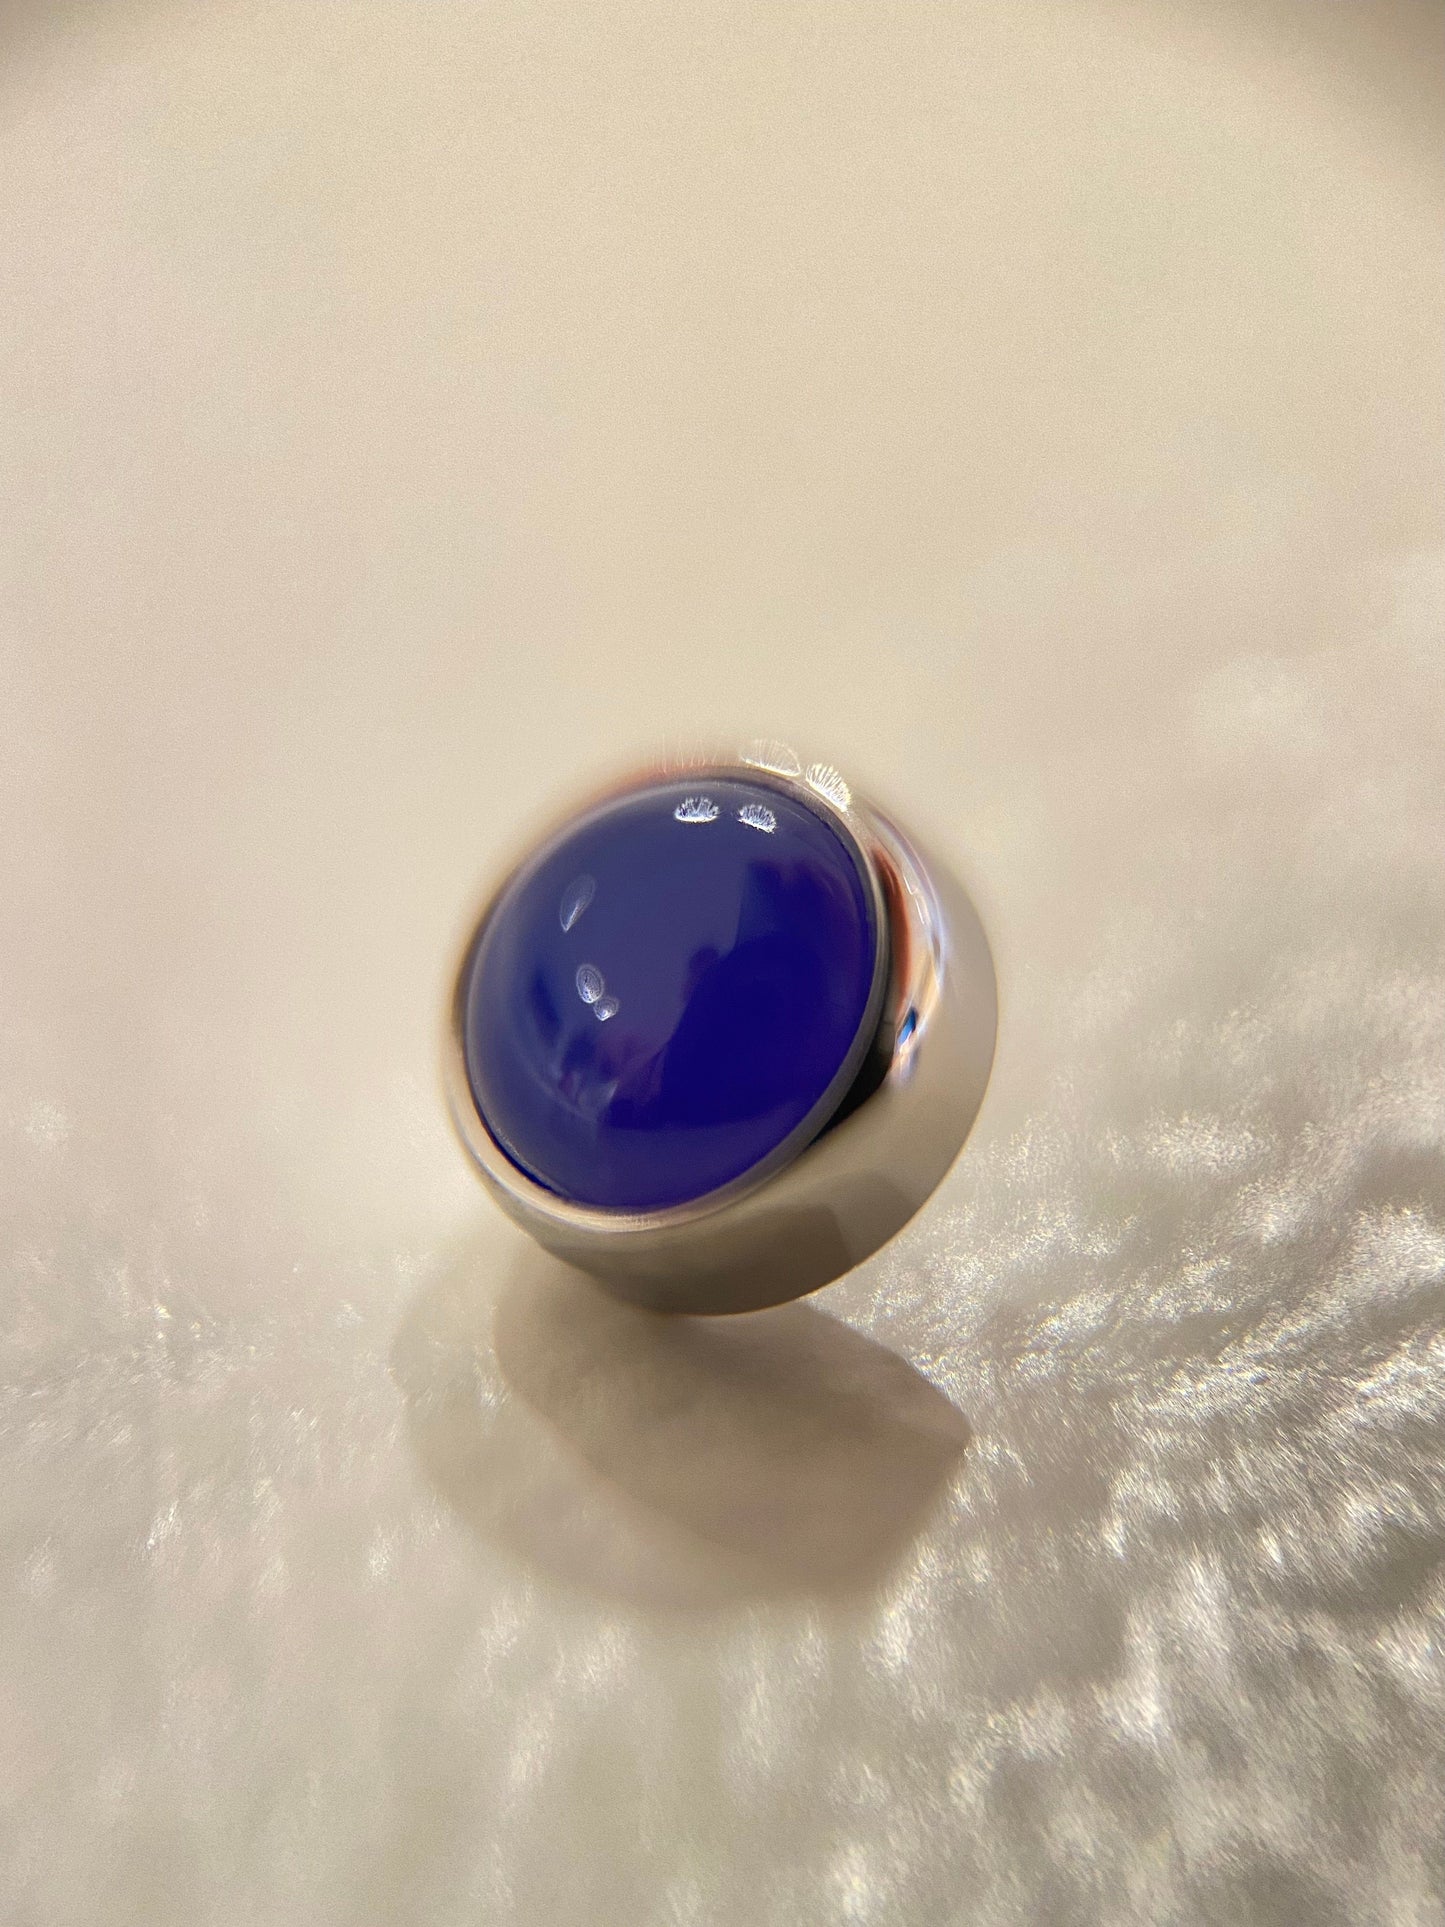 Load image into Gallery viewer, Industrial Strength Threaded Titanium Blue Agate Natural Stone Cabochon (Industrial Strength)
